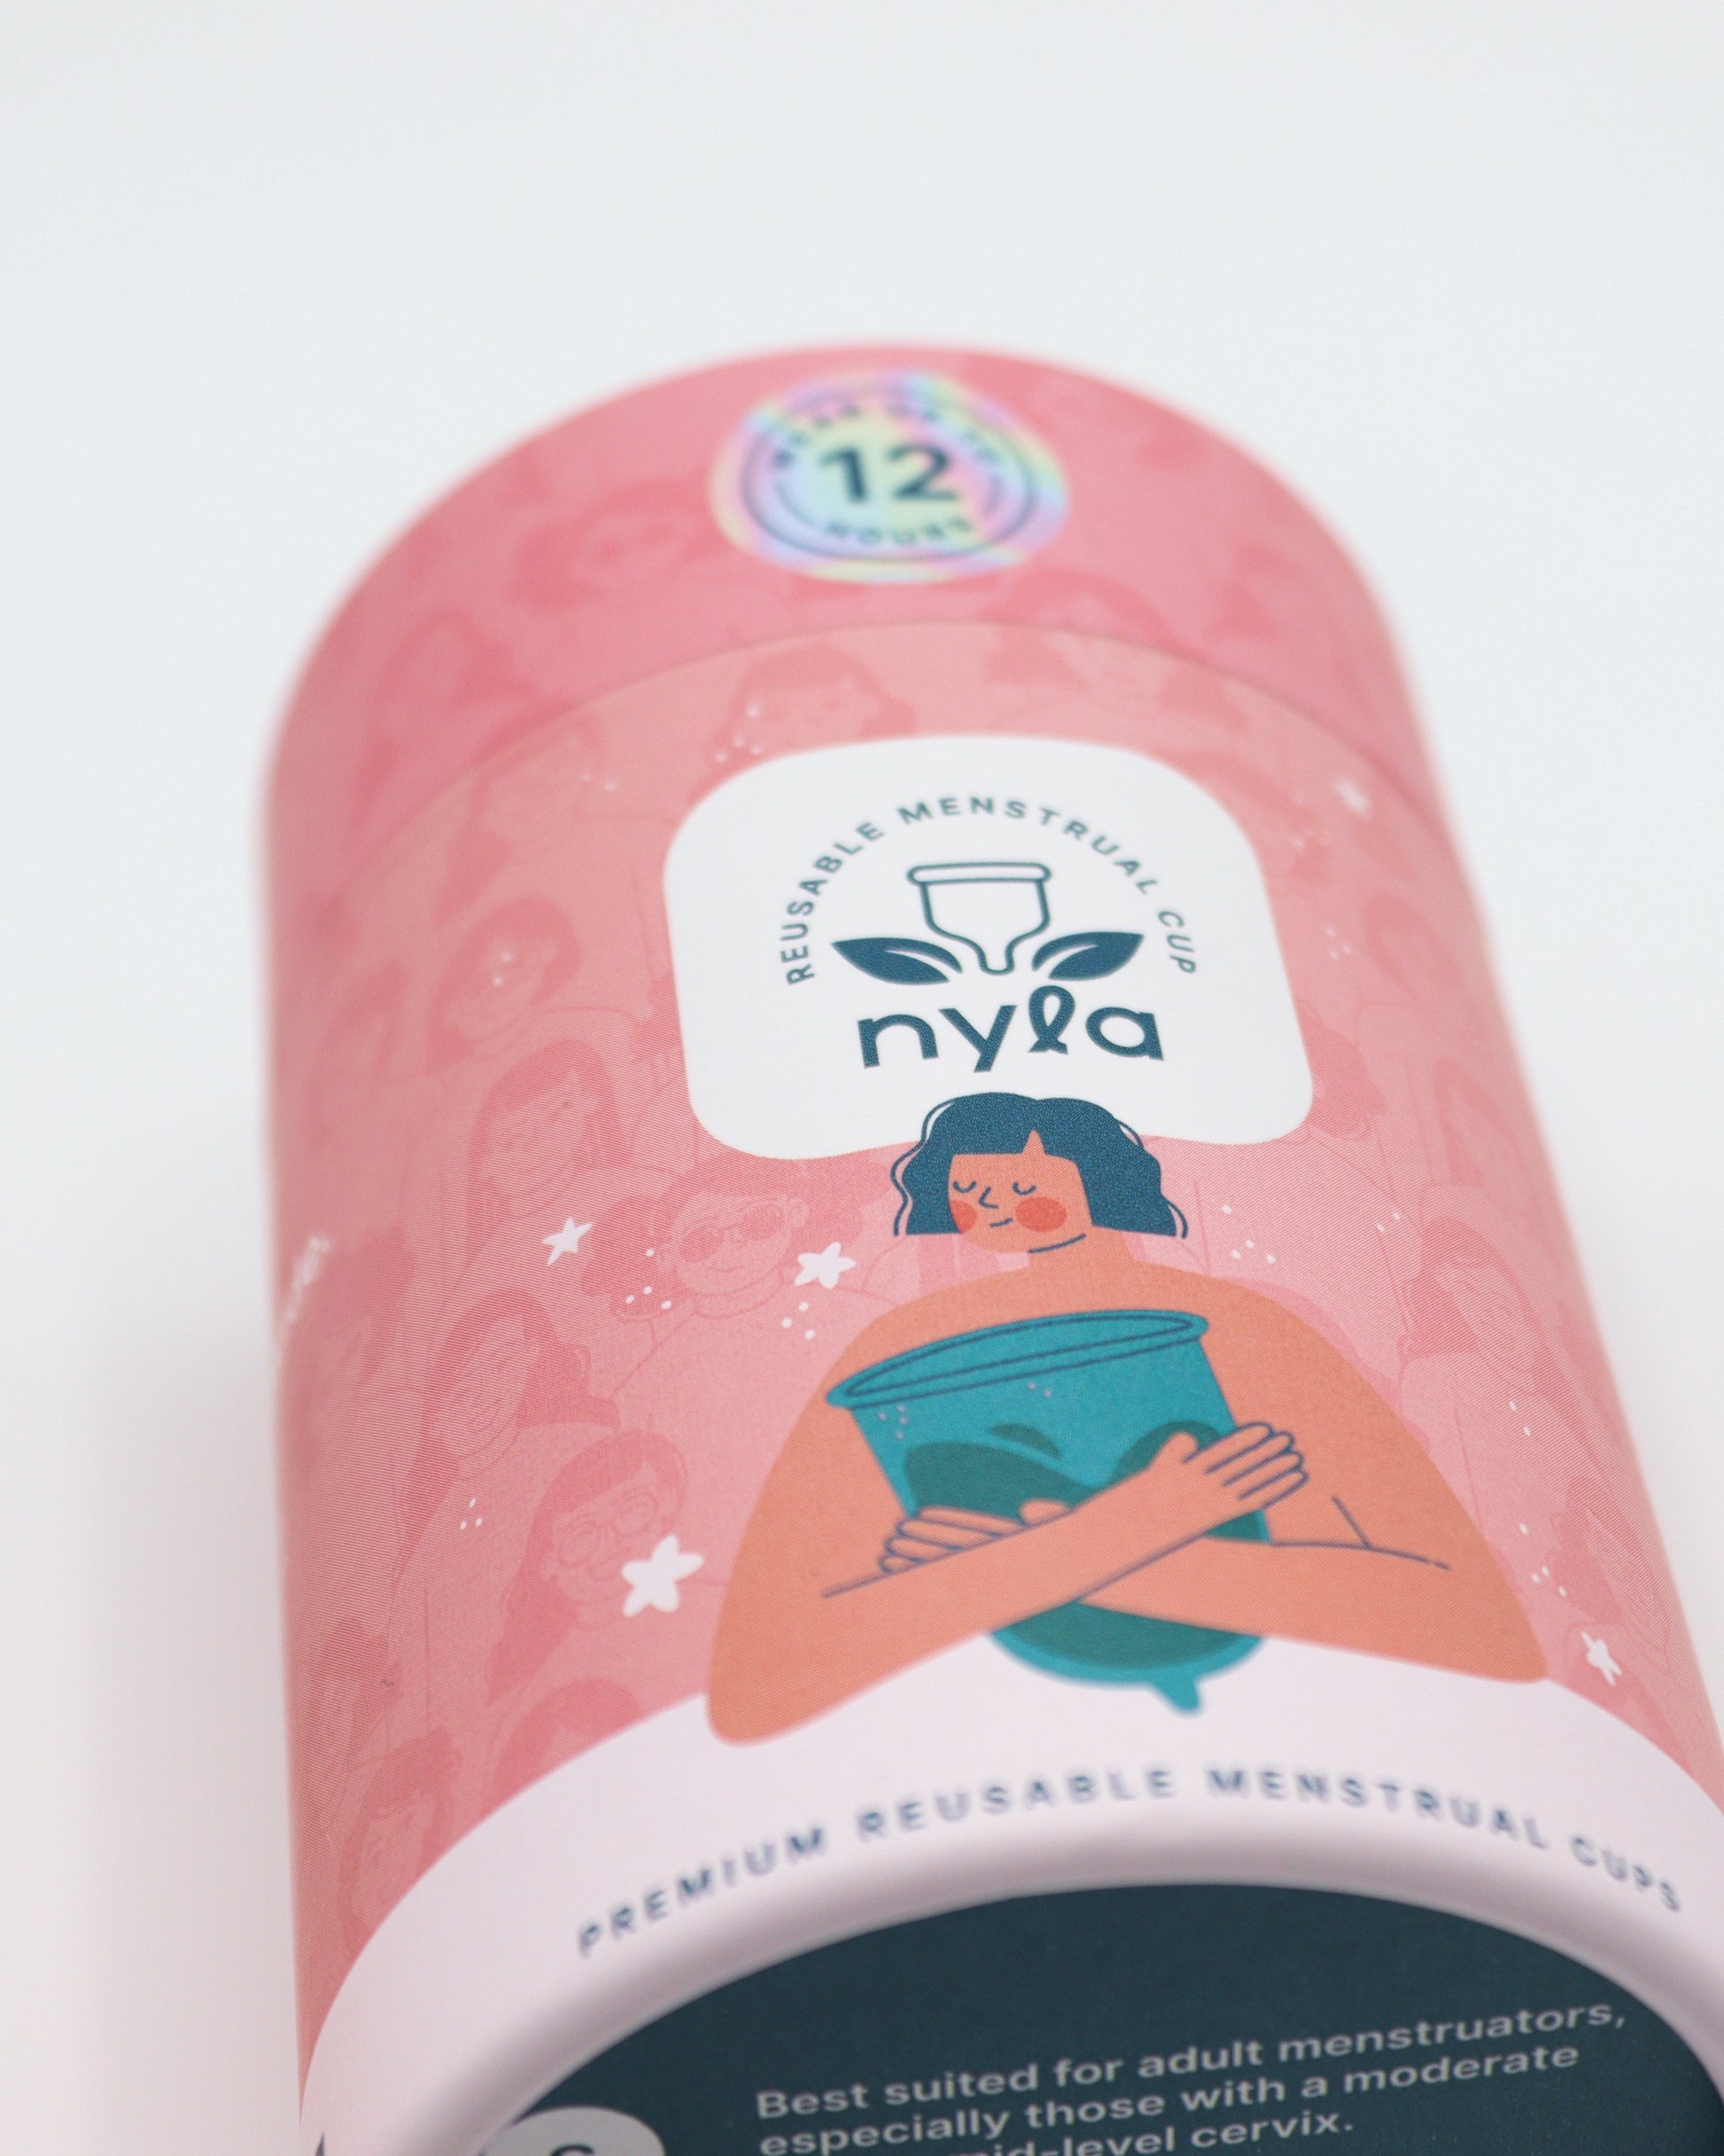 Nyla Menstrual Cup Package